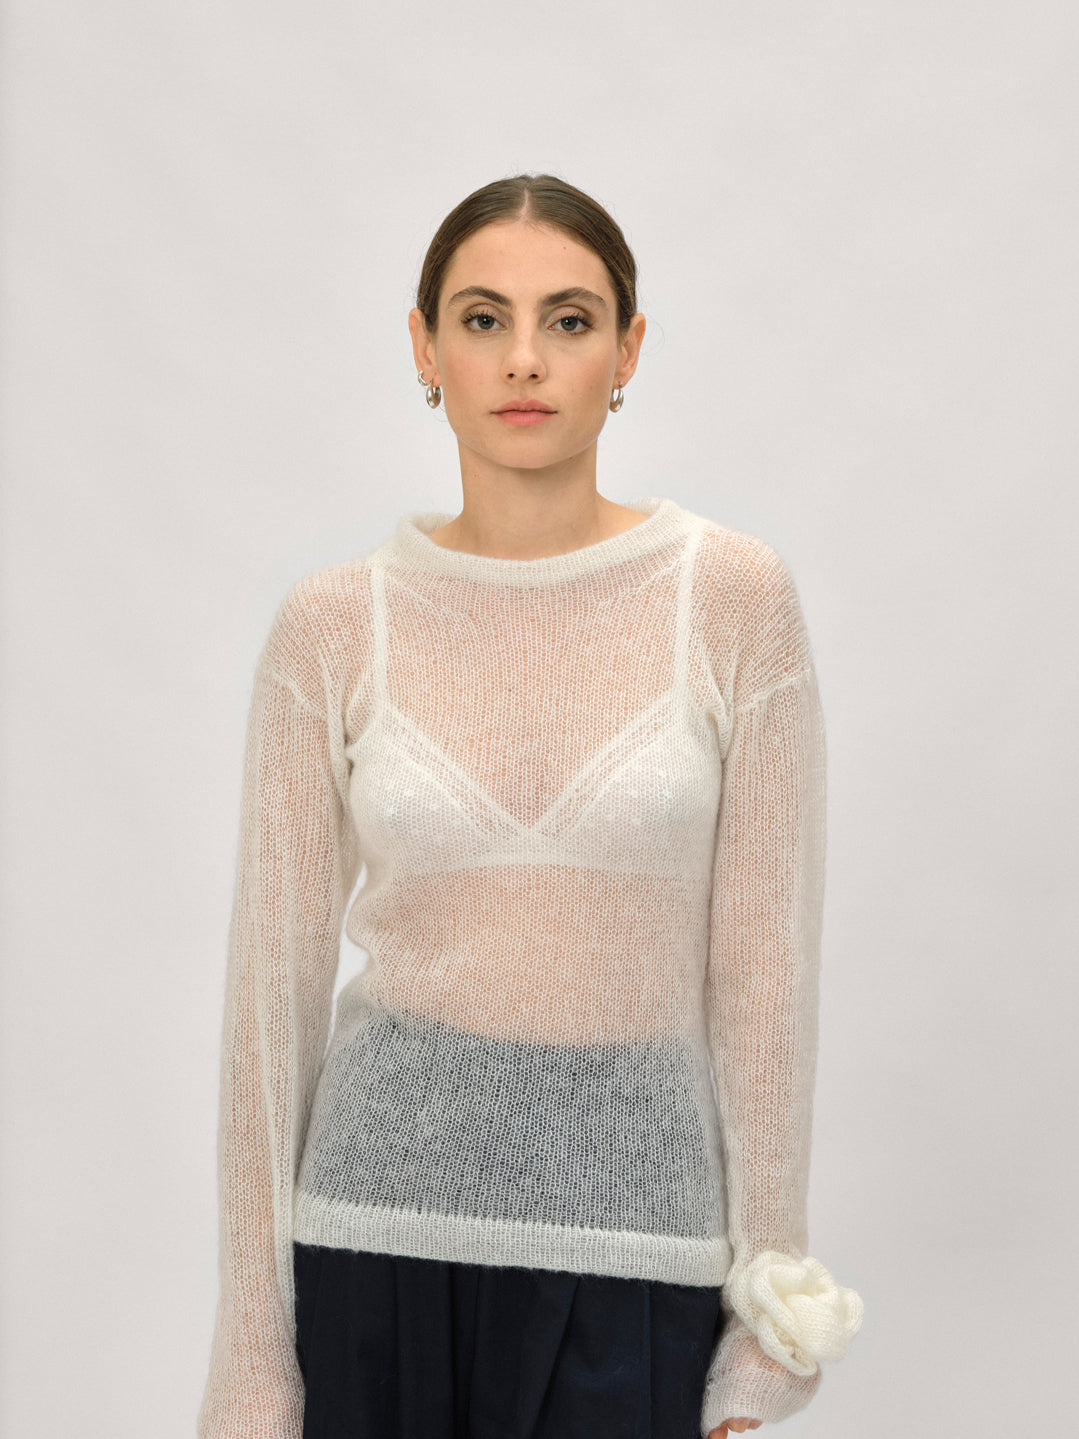 handmade top made in RMS mohair and silk from a sustainable and slow fashion studio. Handmade in Belgium 